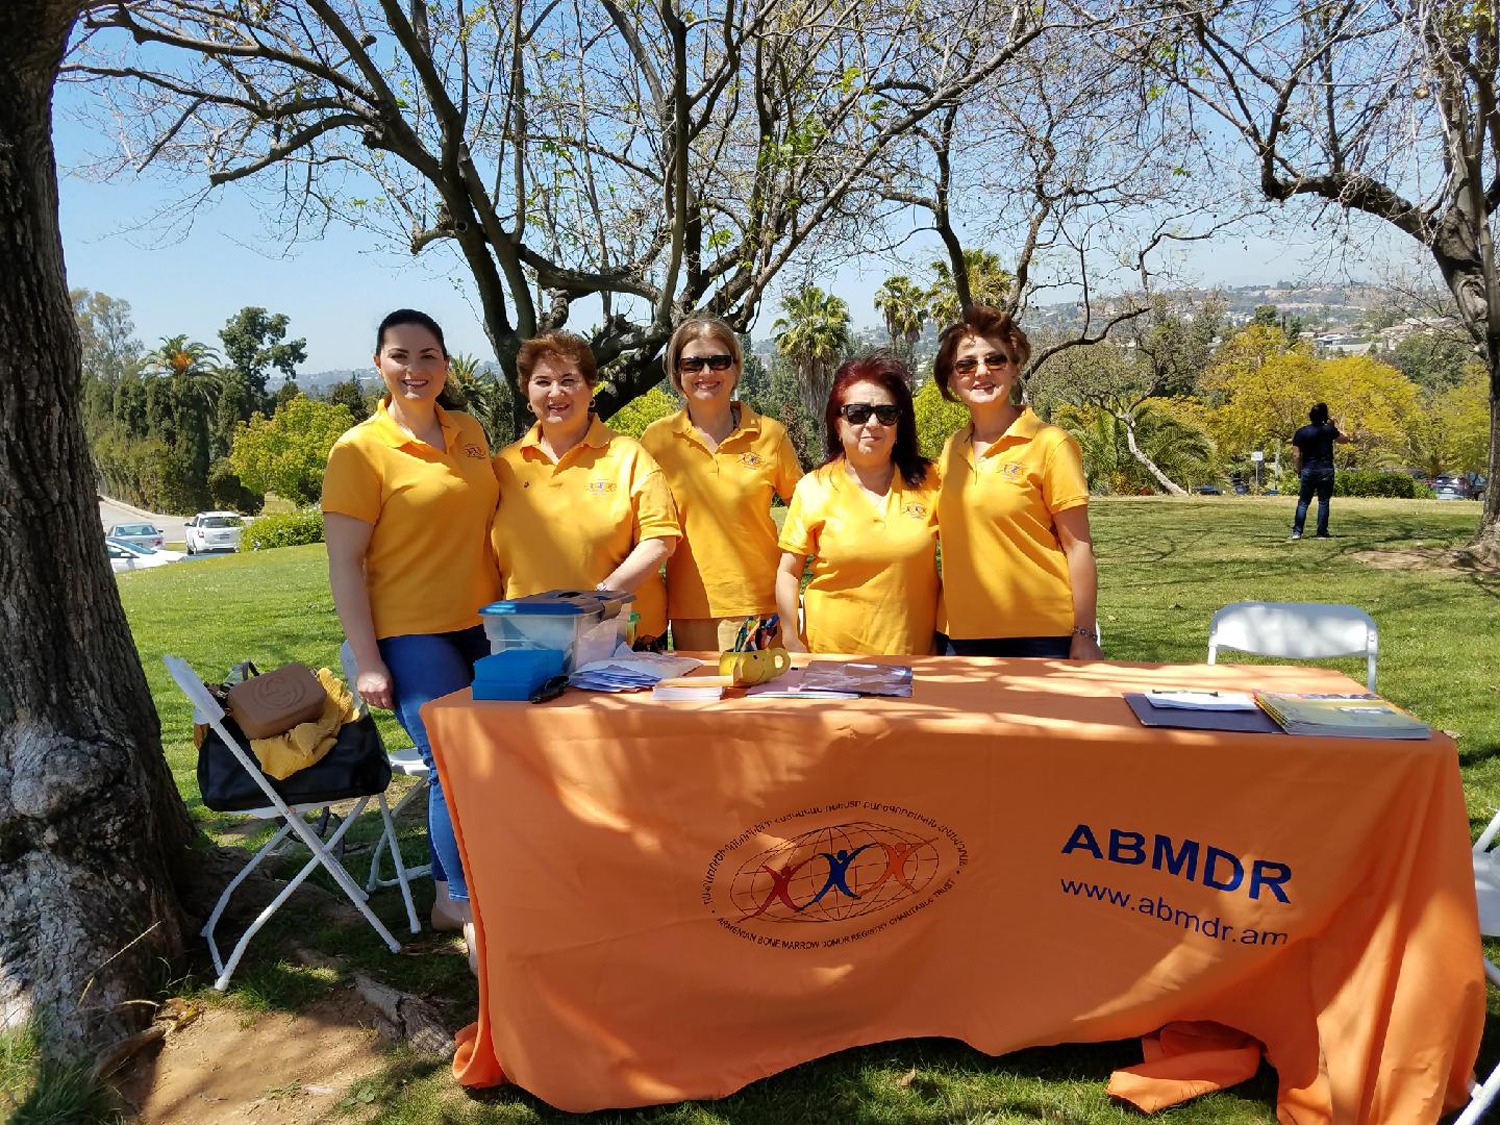 ABMDR Team on Grounds of Montebello Monument